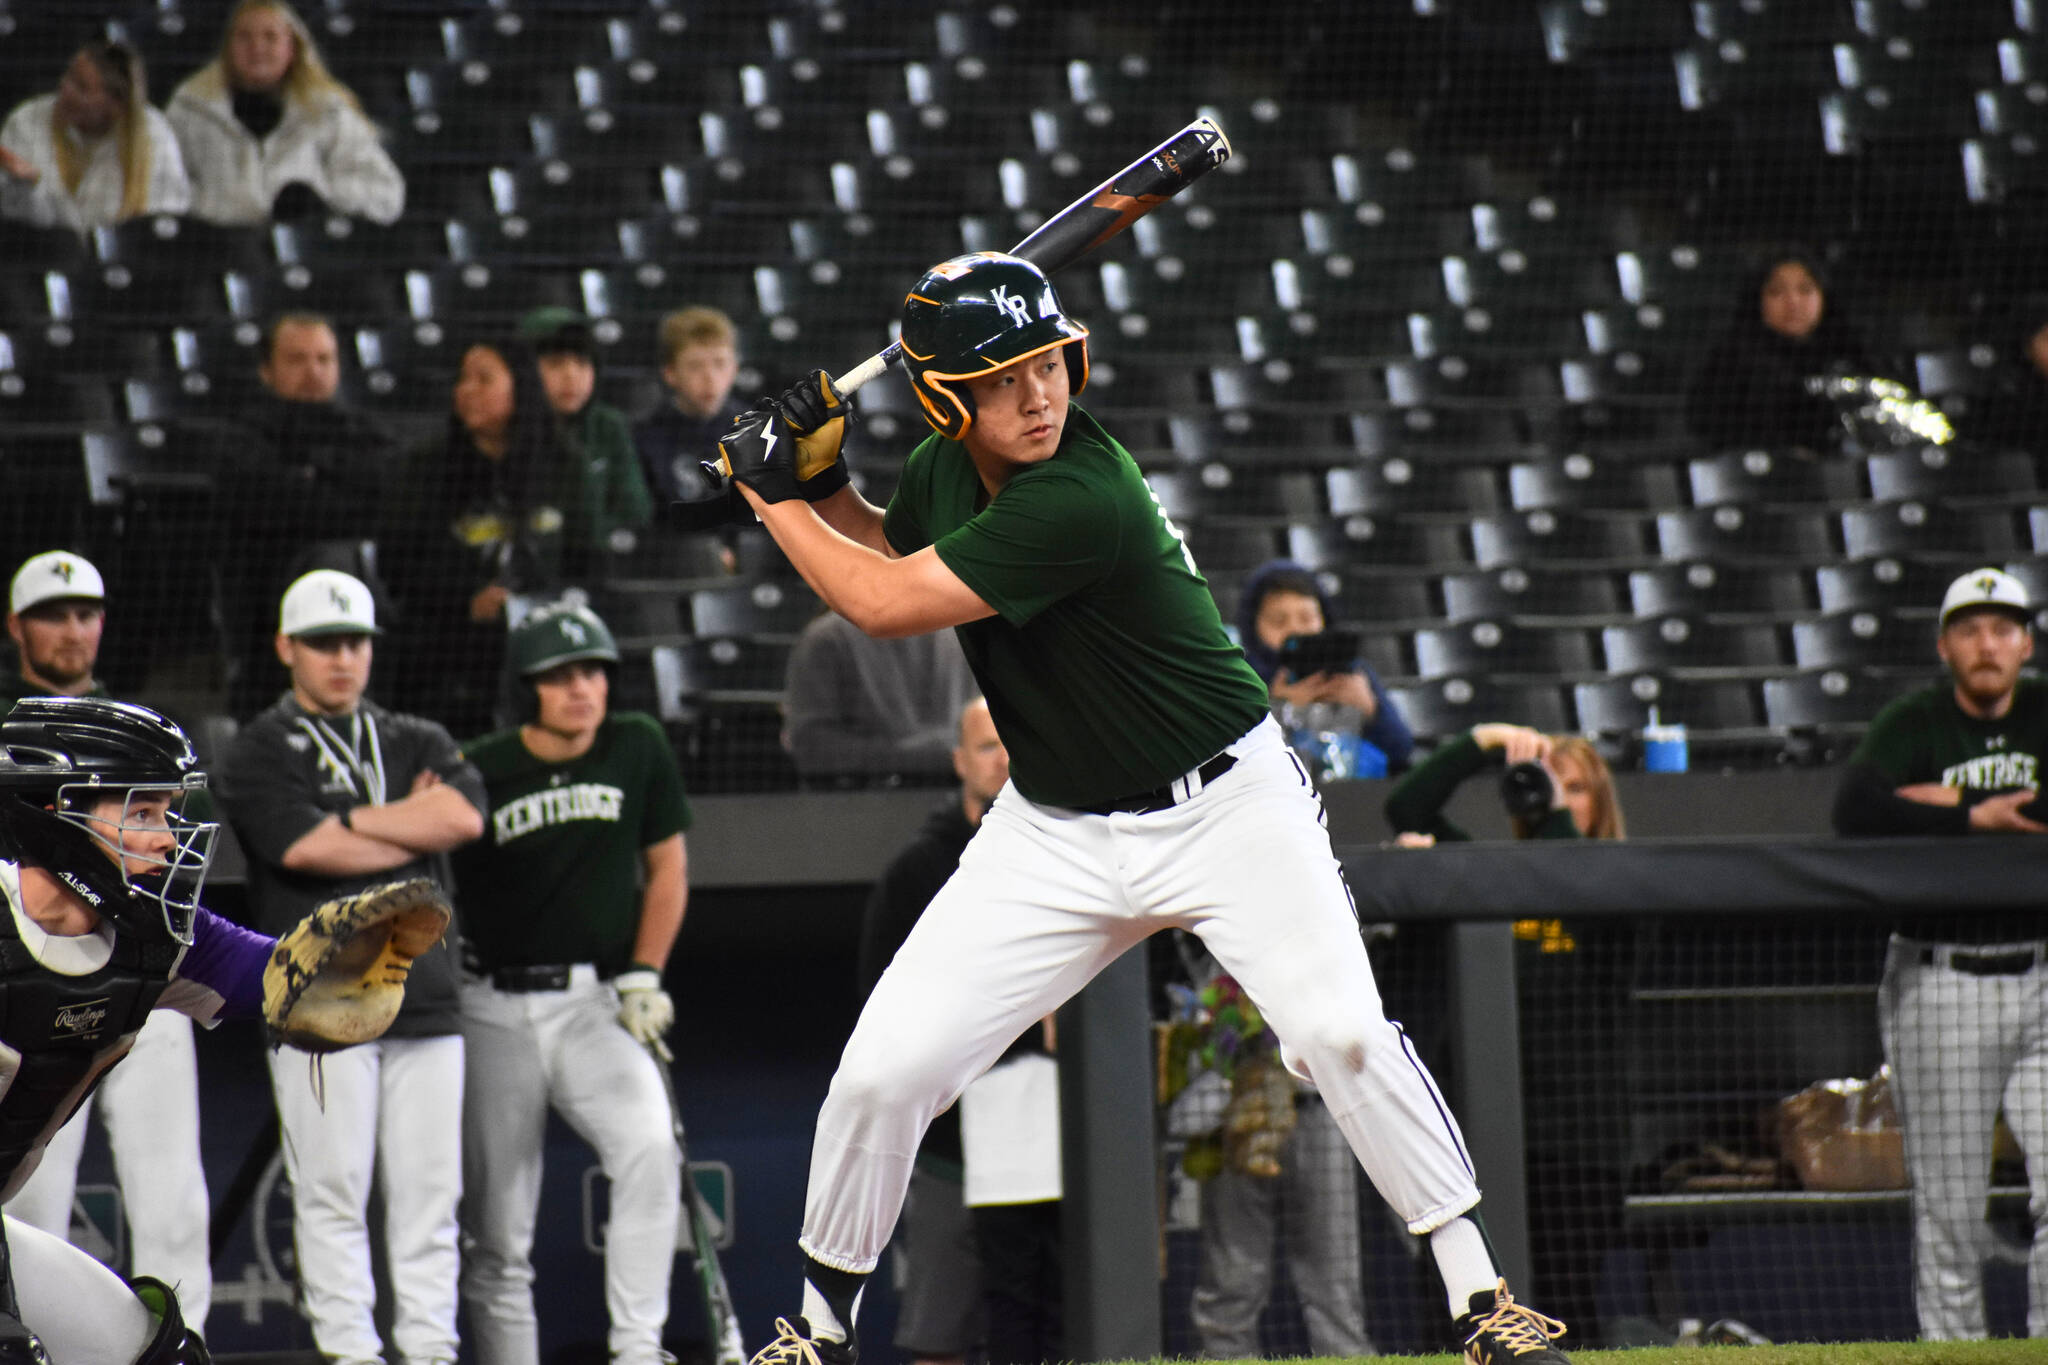 Ethan Sugimoto gets ready to hit at T-Mobile Park against Lake Washington. Ben Ray / The Reporter